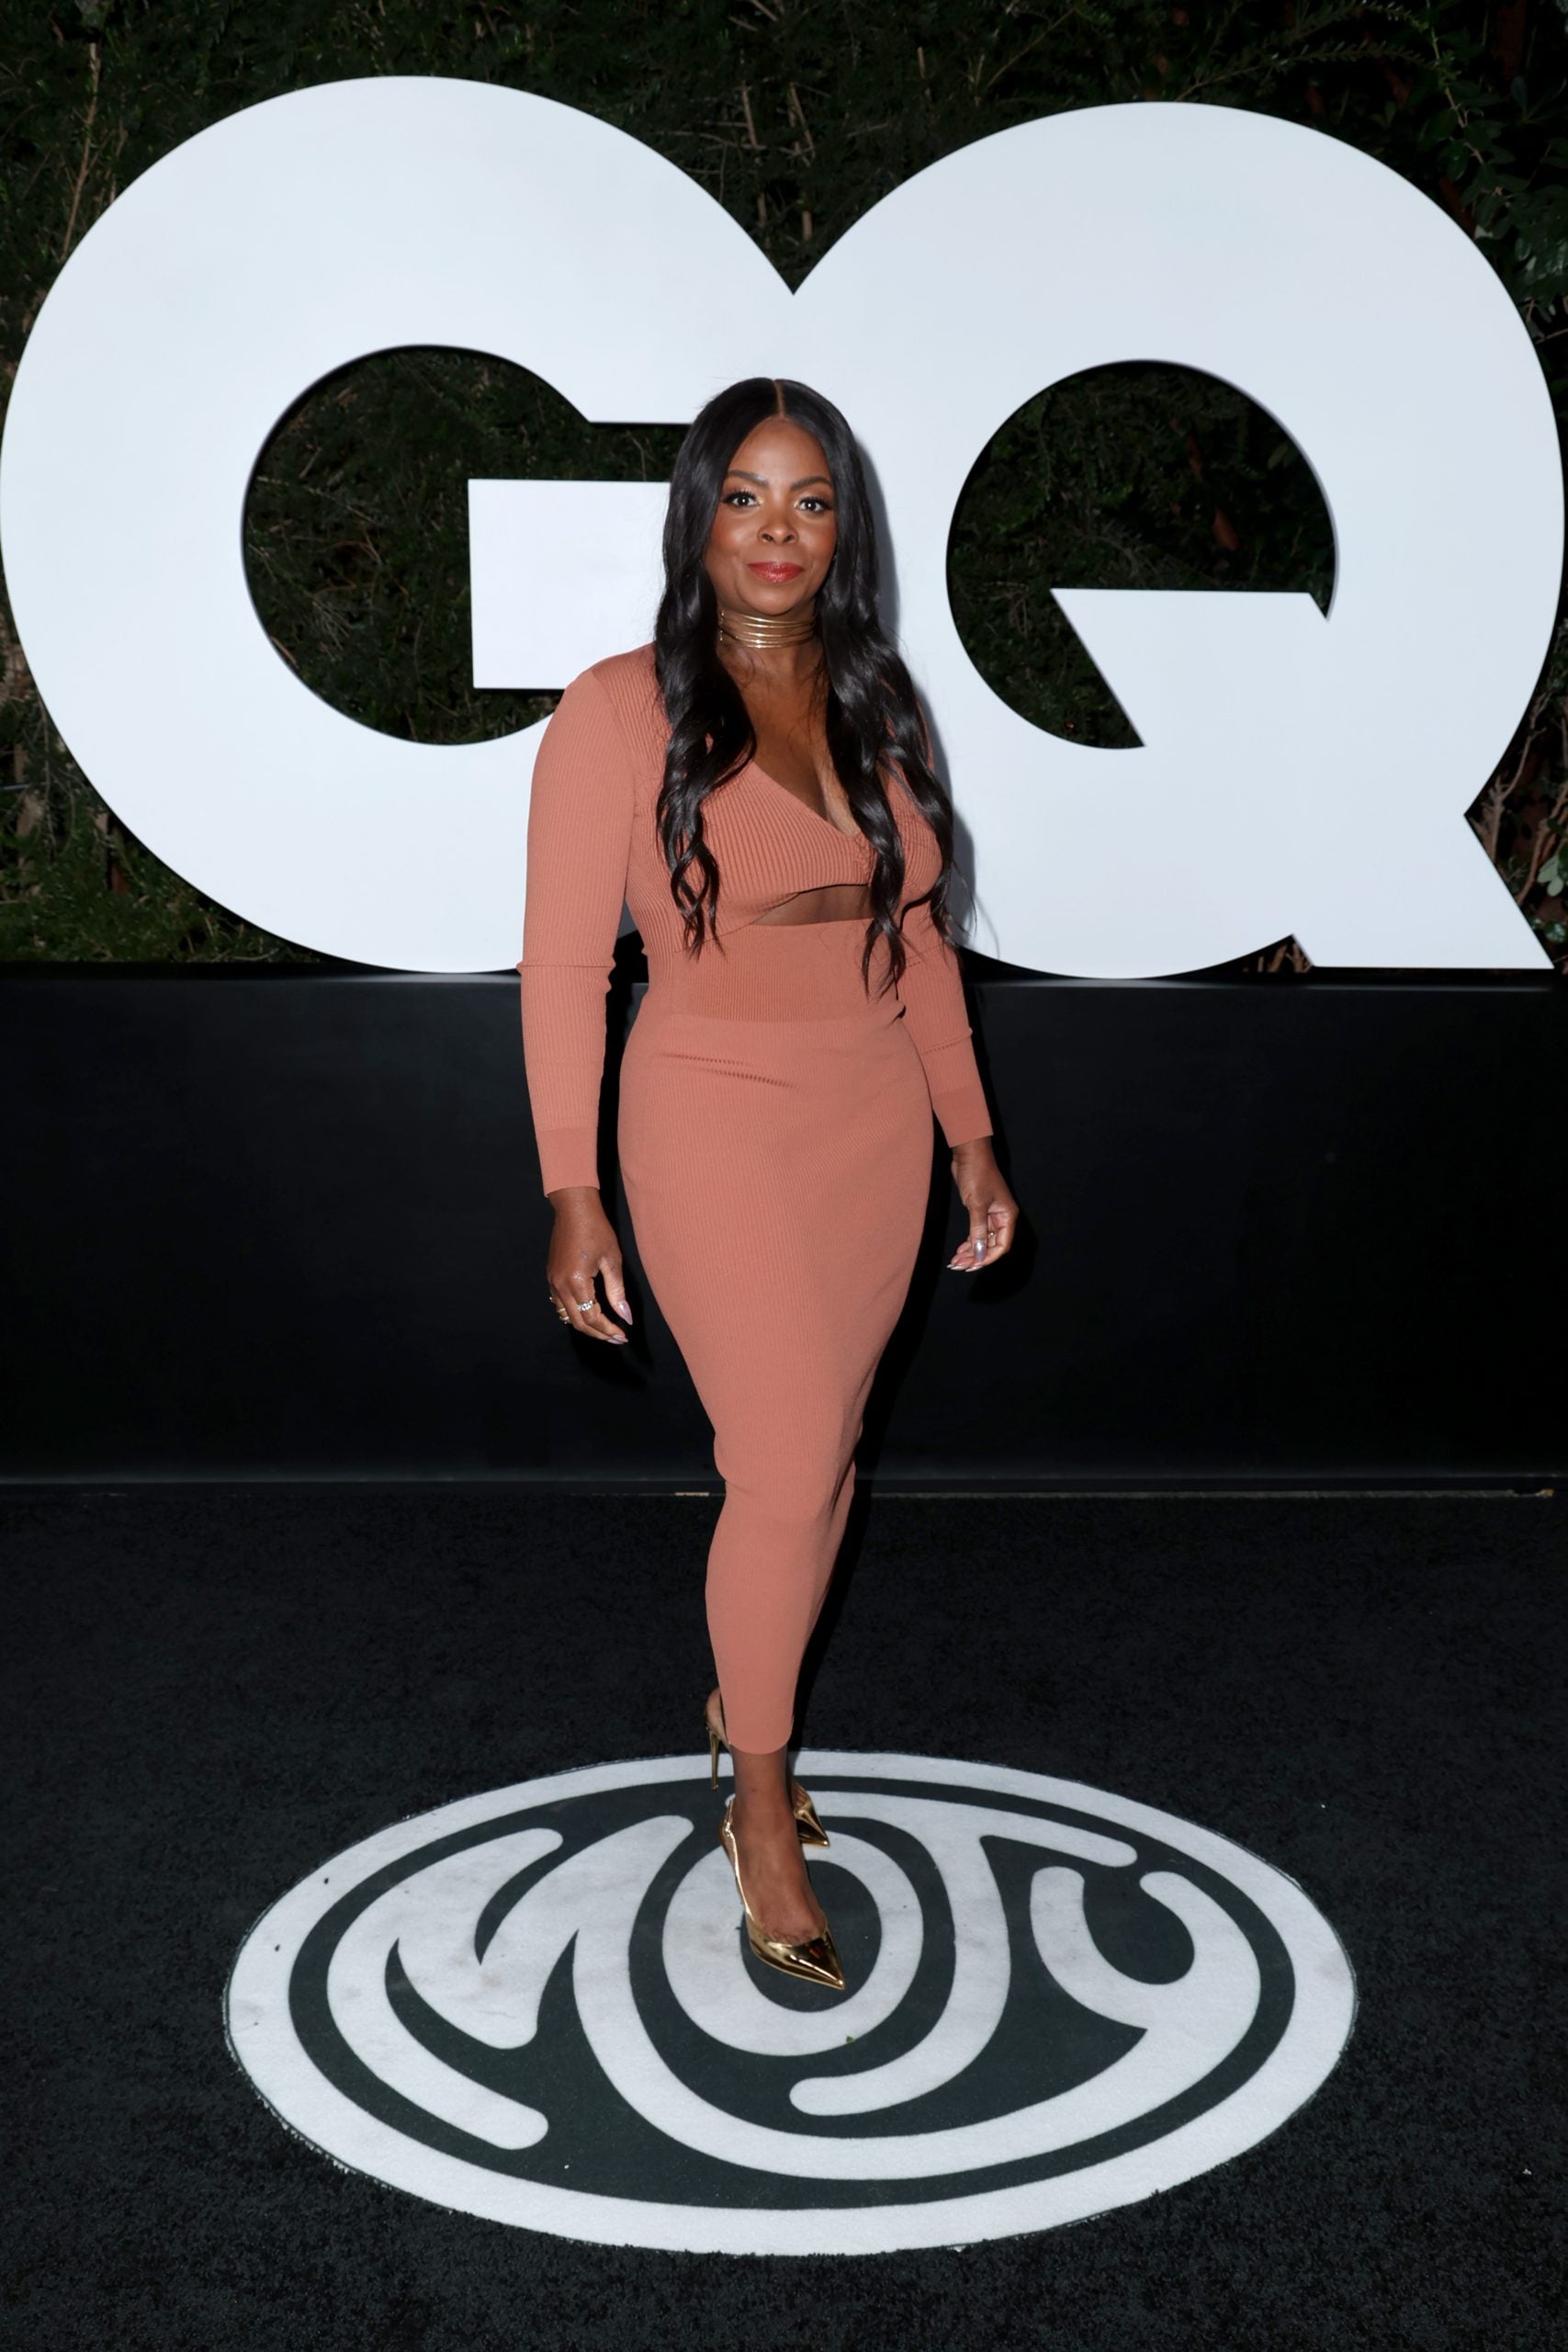 Star Gazing: Celebs Hit The Red Carpet For The GQ Men Of The Year Awards, 'Devotion,' And More